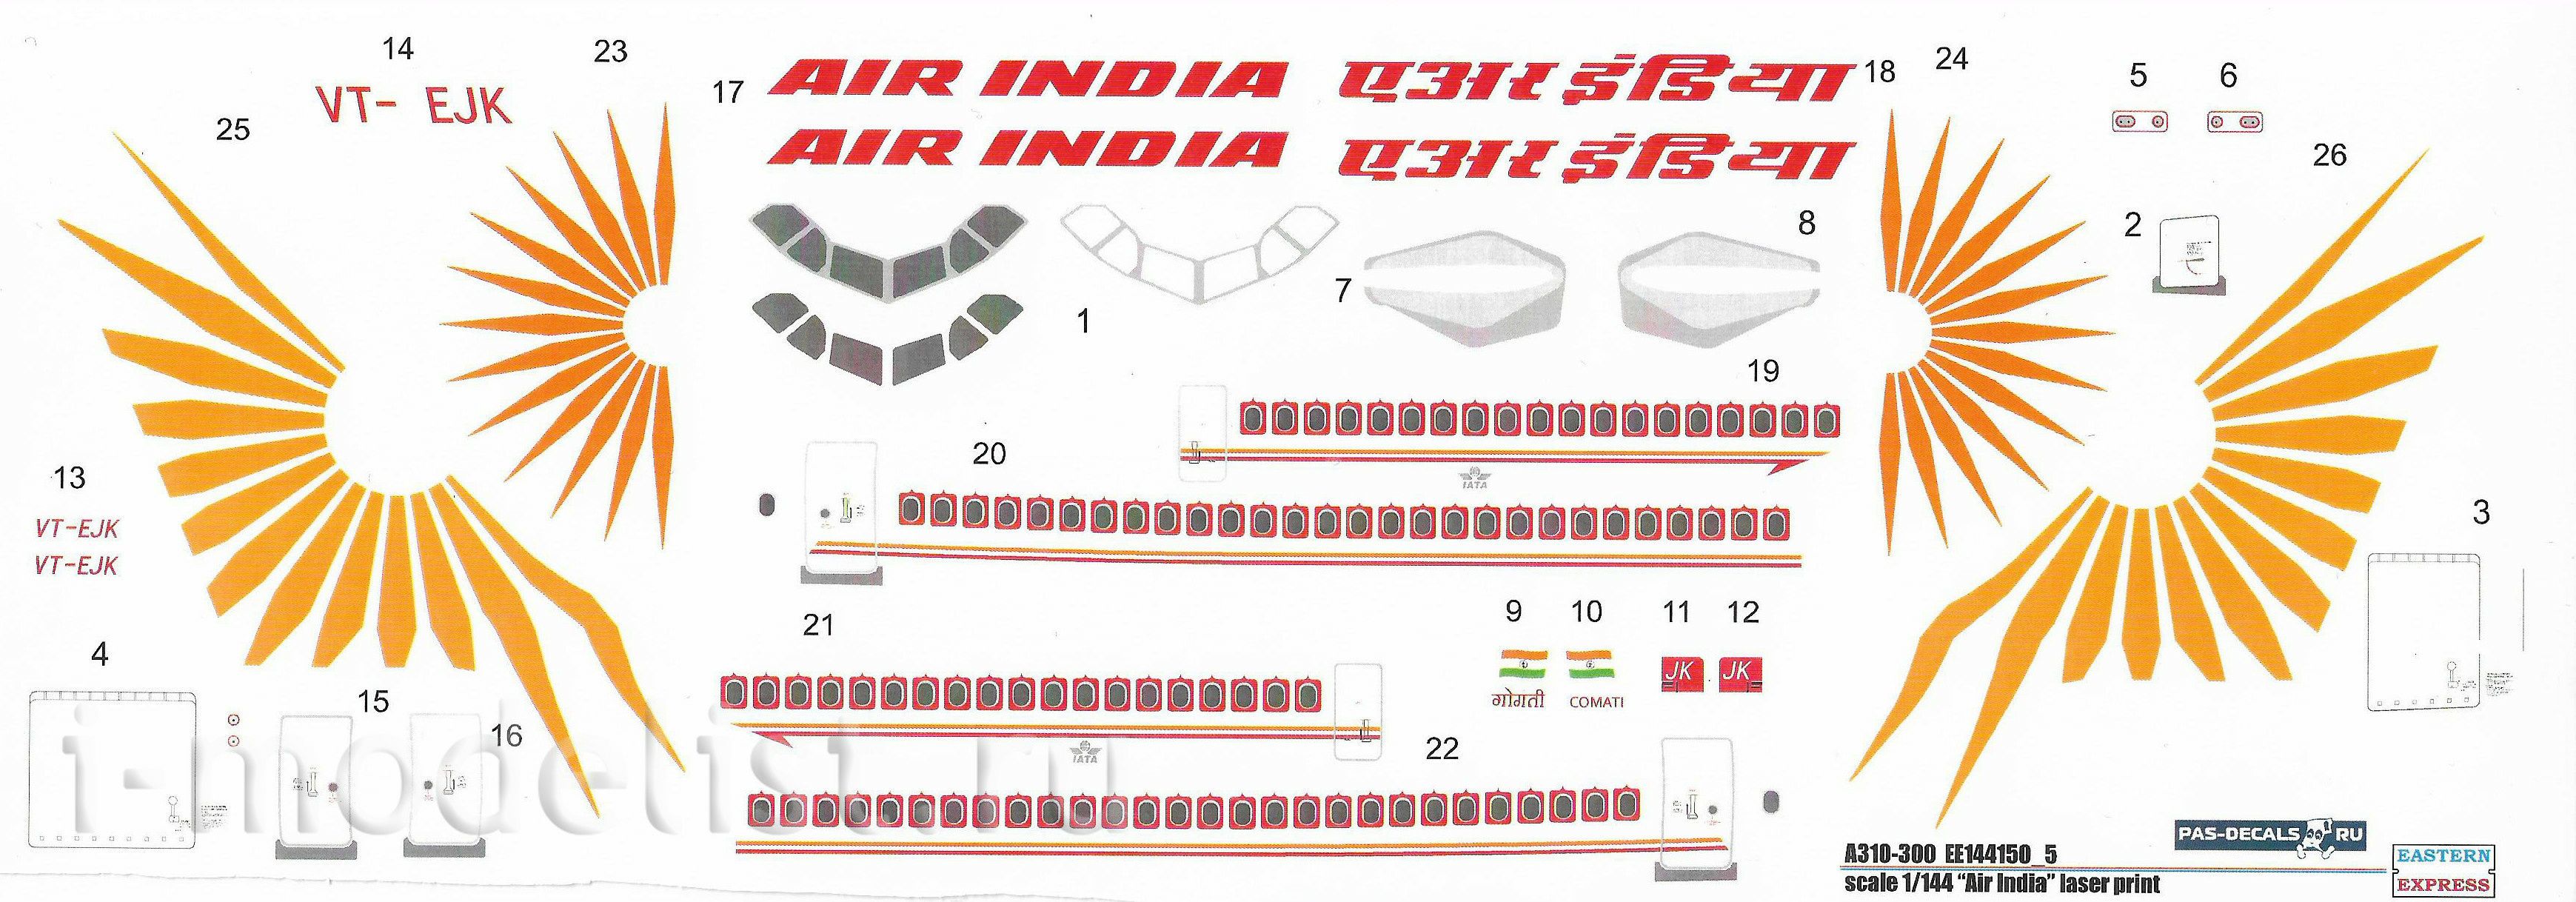 144150-5 Orient Express 1/144 Airliner A310-300 AIR INDIA